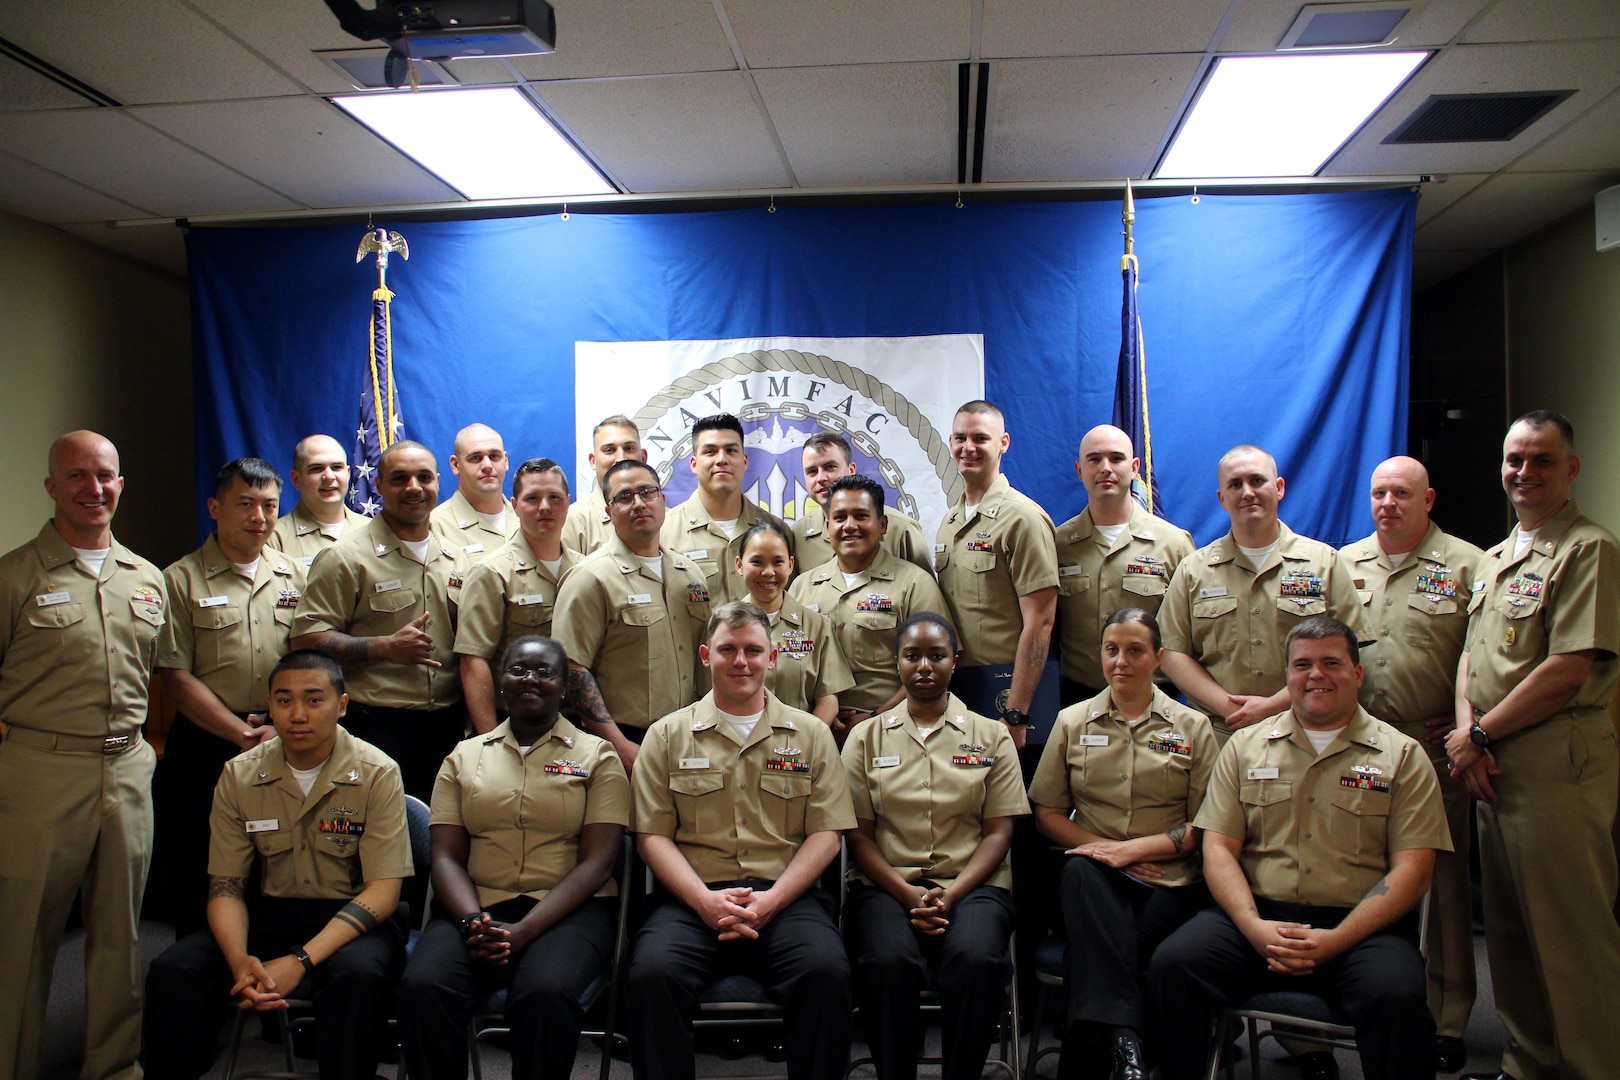 The Naval Afloat Maintenance Training Strategy program at PSNS & IMF graduated 20 Sailors assigned to Naval Intermediate Maintenance Facility, Pacific Northwest, during a June 13 ceremony on Naval Base Kitsap – Bangor, Washington. (Mike Rowland, PSNS & IMF)